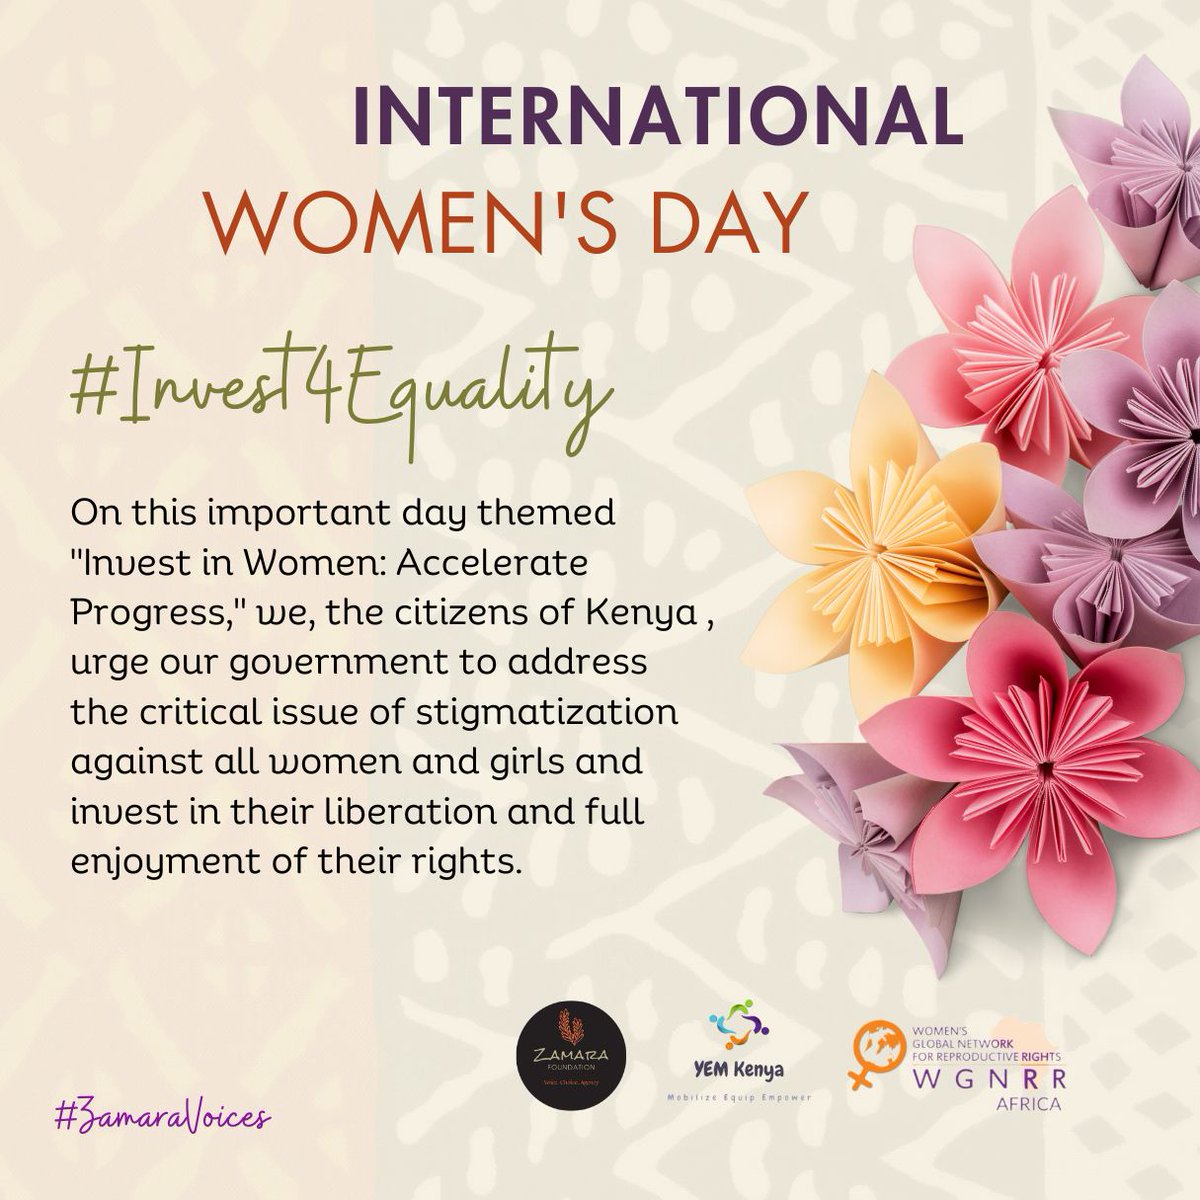 Communities urge government to address stigmatization against women & girls in all their diversity.
#Invest4Equality
#ZamaraVoices